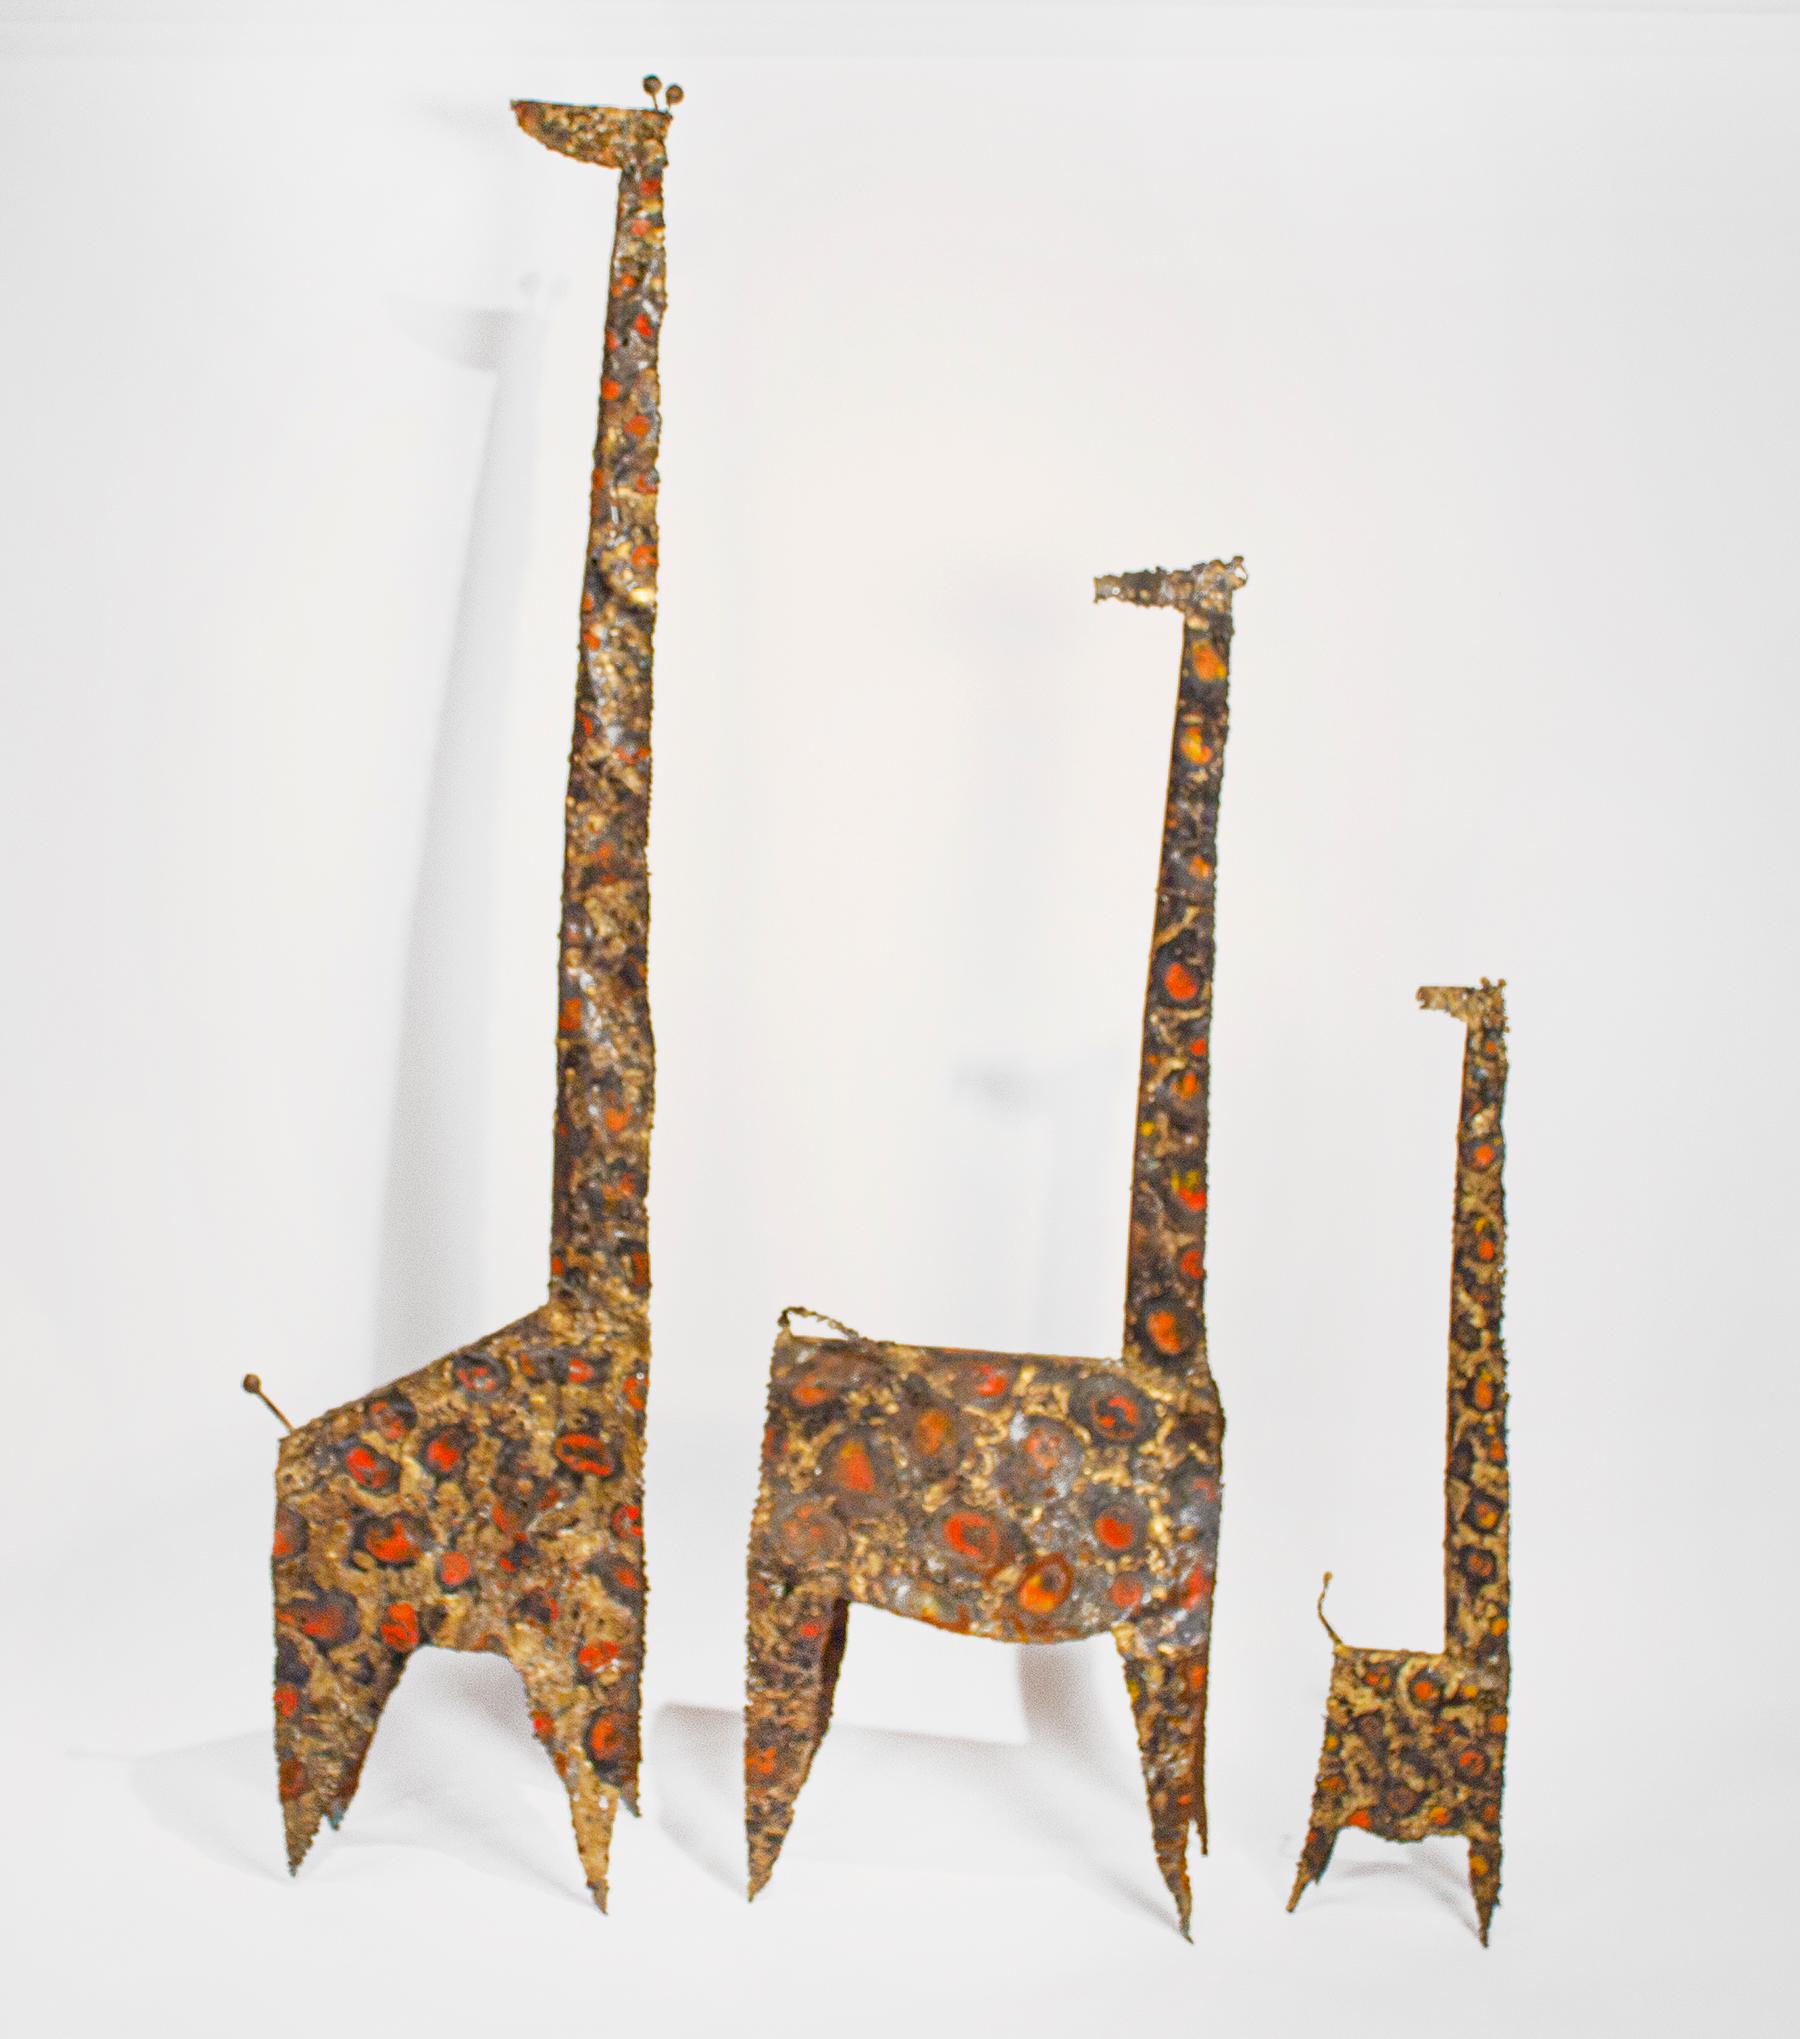 Amazing family of three large scale Giraffe sculptures by renowned Iowa abstract artist James Anthony Bearden. From his Animal Series, The large Giraffe measures 72